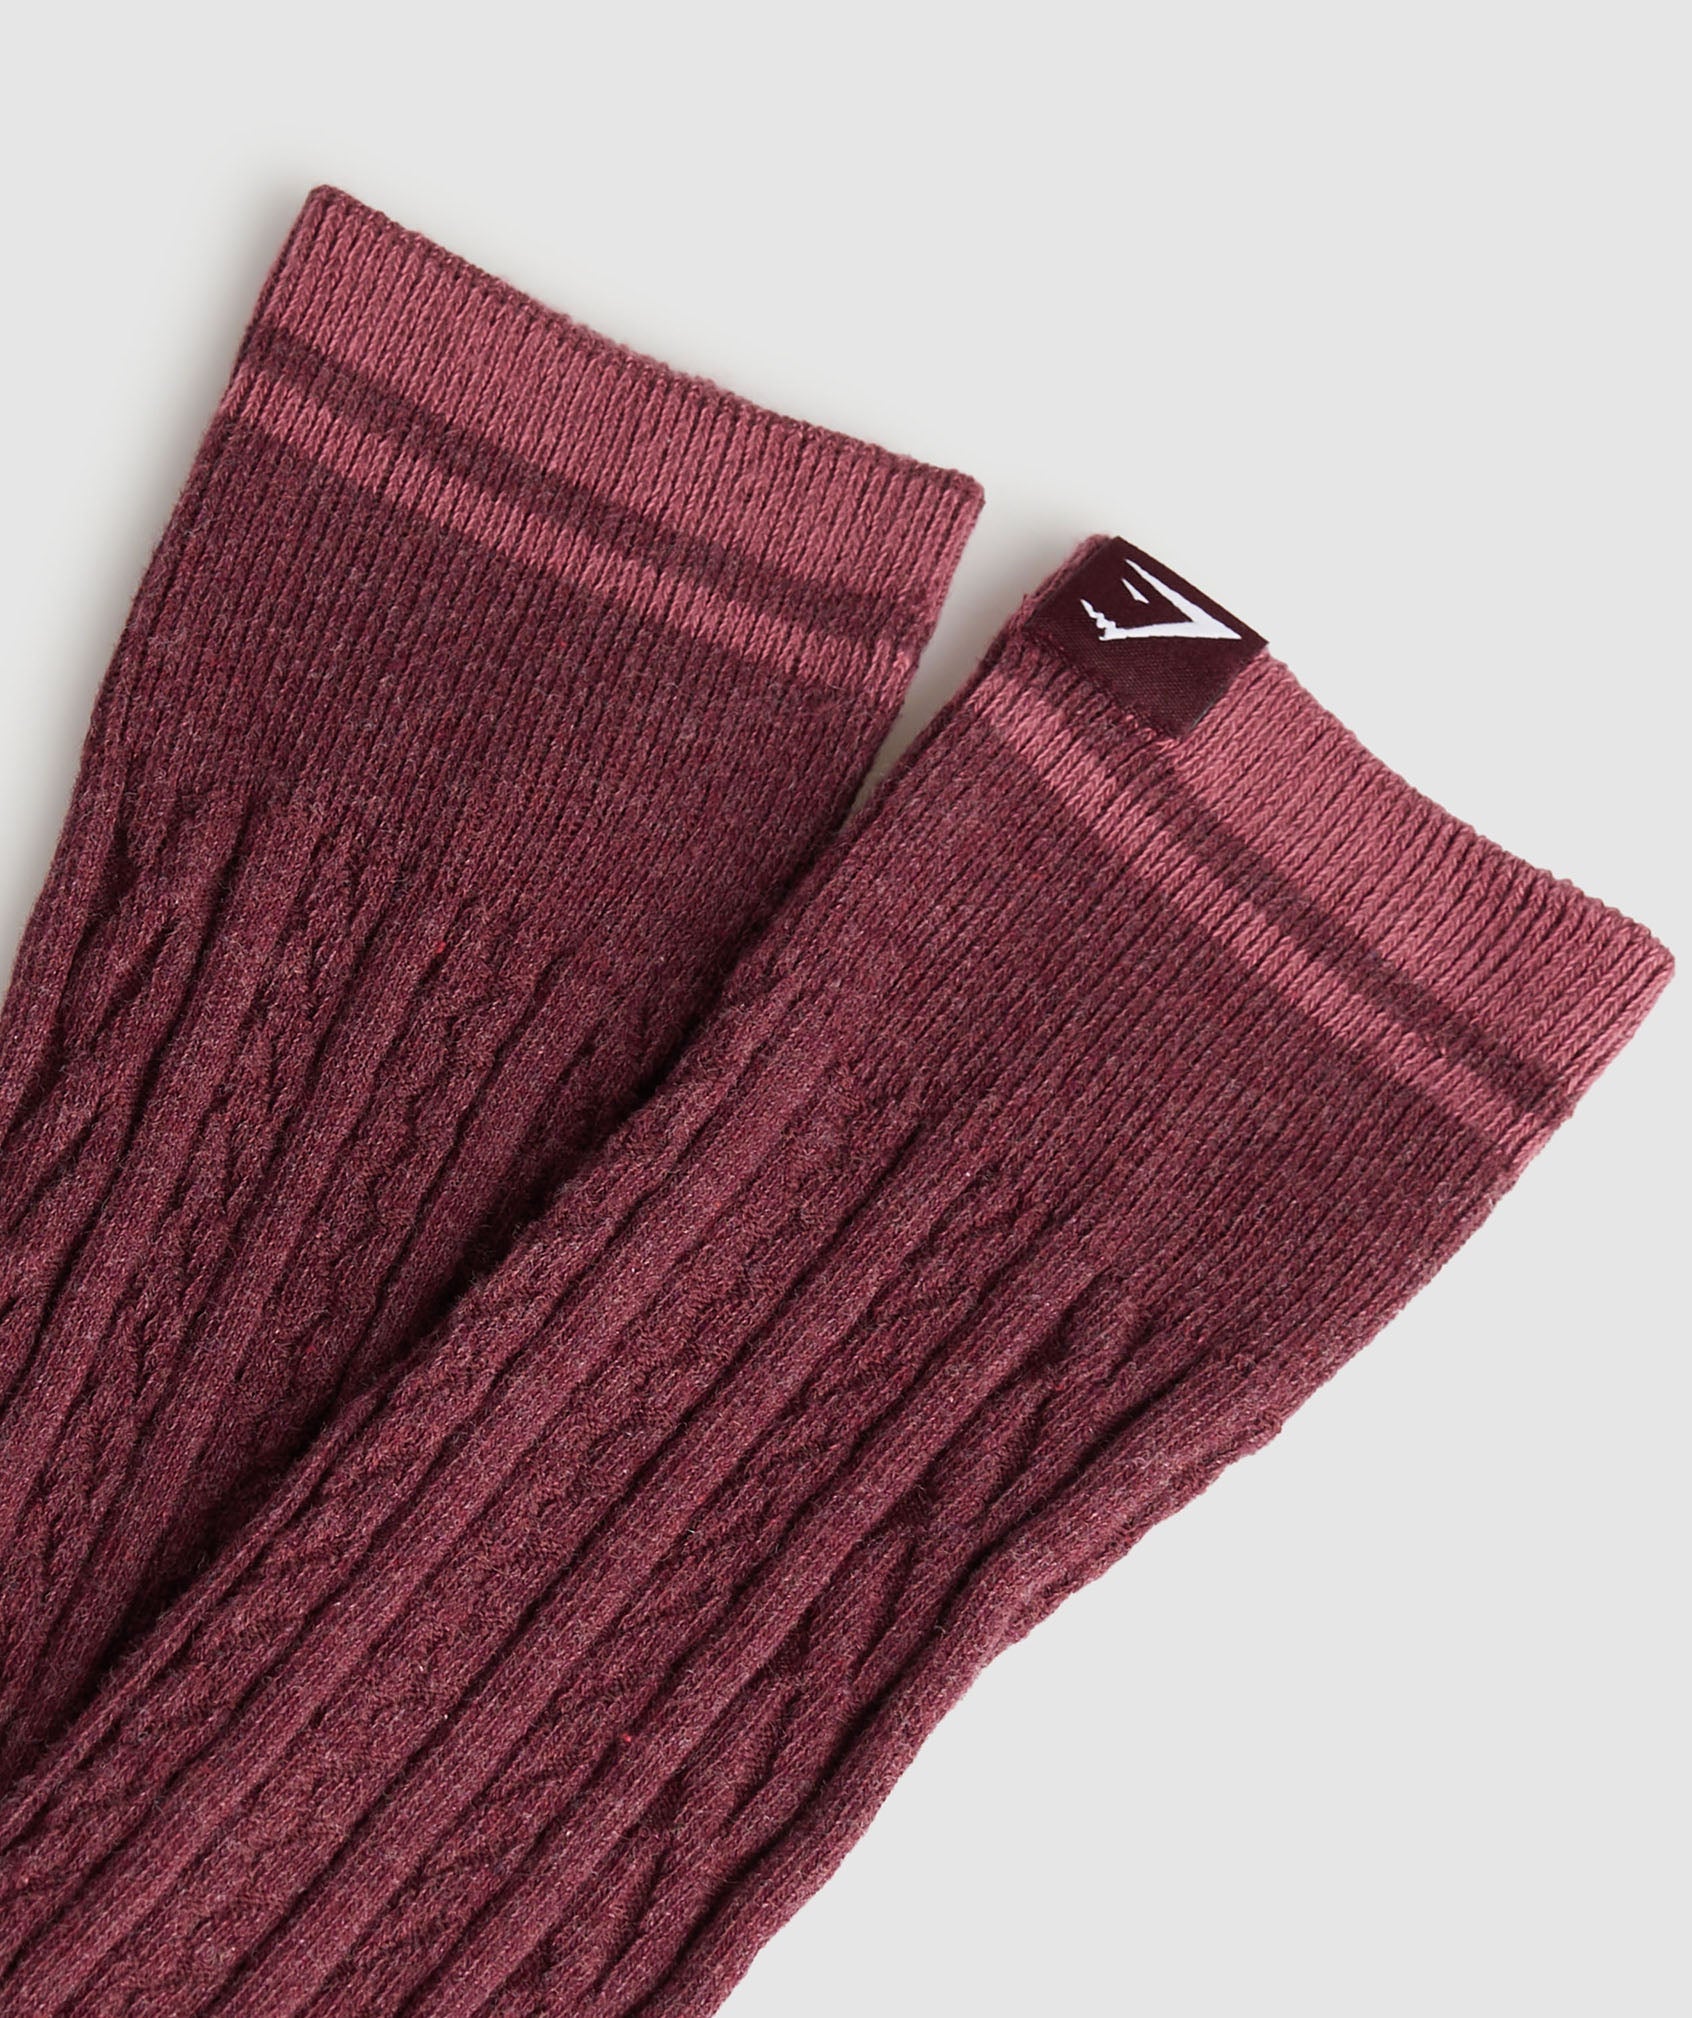 Rest Day Cable Socks in Rich Maroon Marl/Burgundy Brown/Soft Berry - view 2